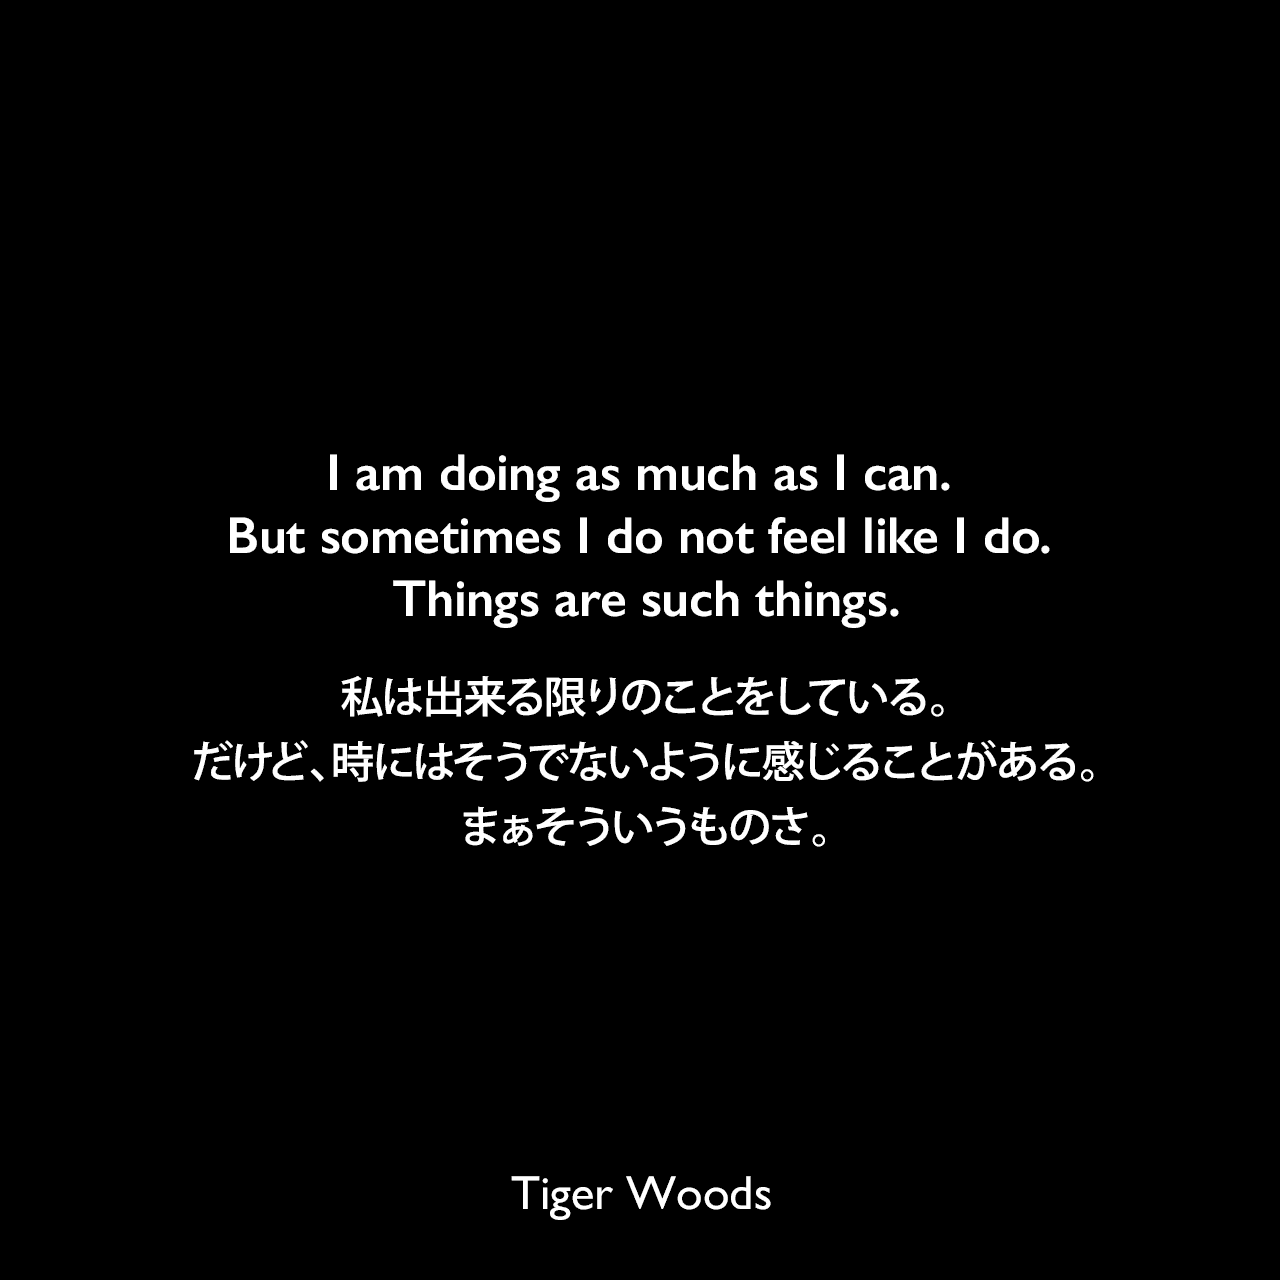 I am doing as much as I can. But sometimes I do not feel like I do. Things are such things.私は出来る限りのことをしている。だけど、時にはそうでないように感じることがある。まぁそういうものさ。Tiger Woods